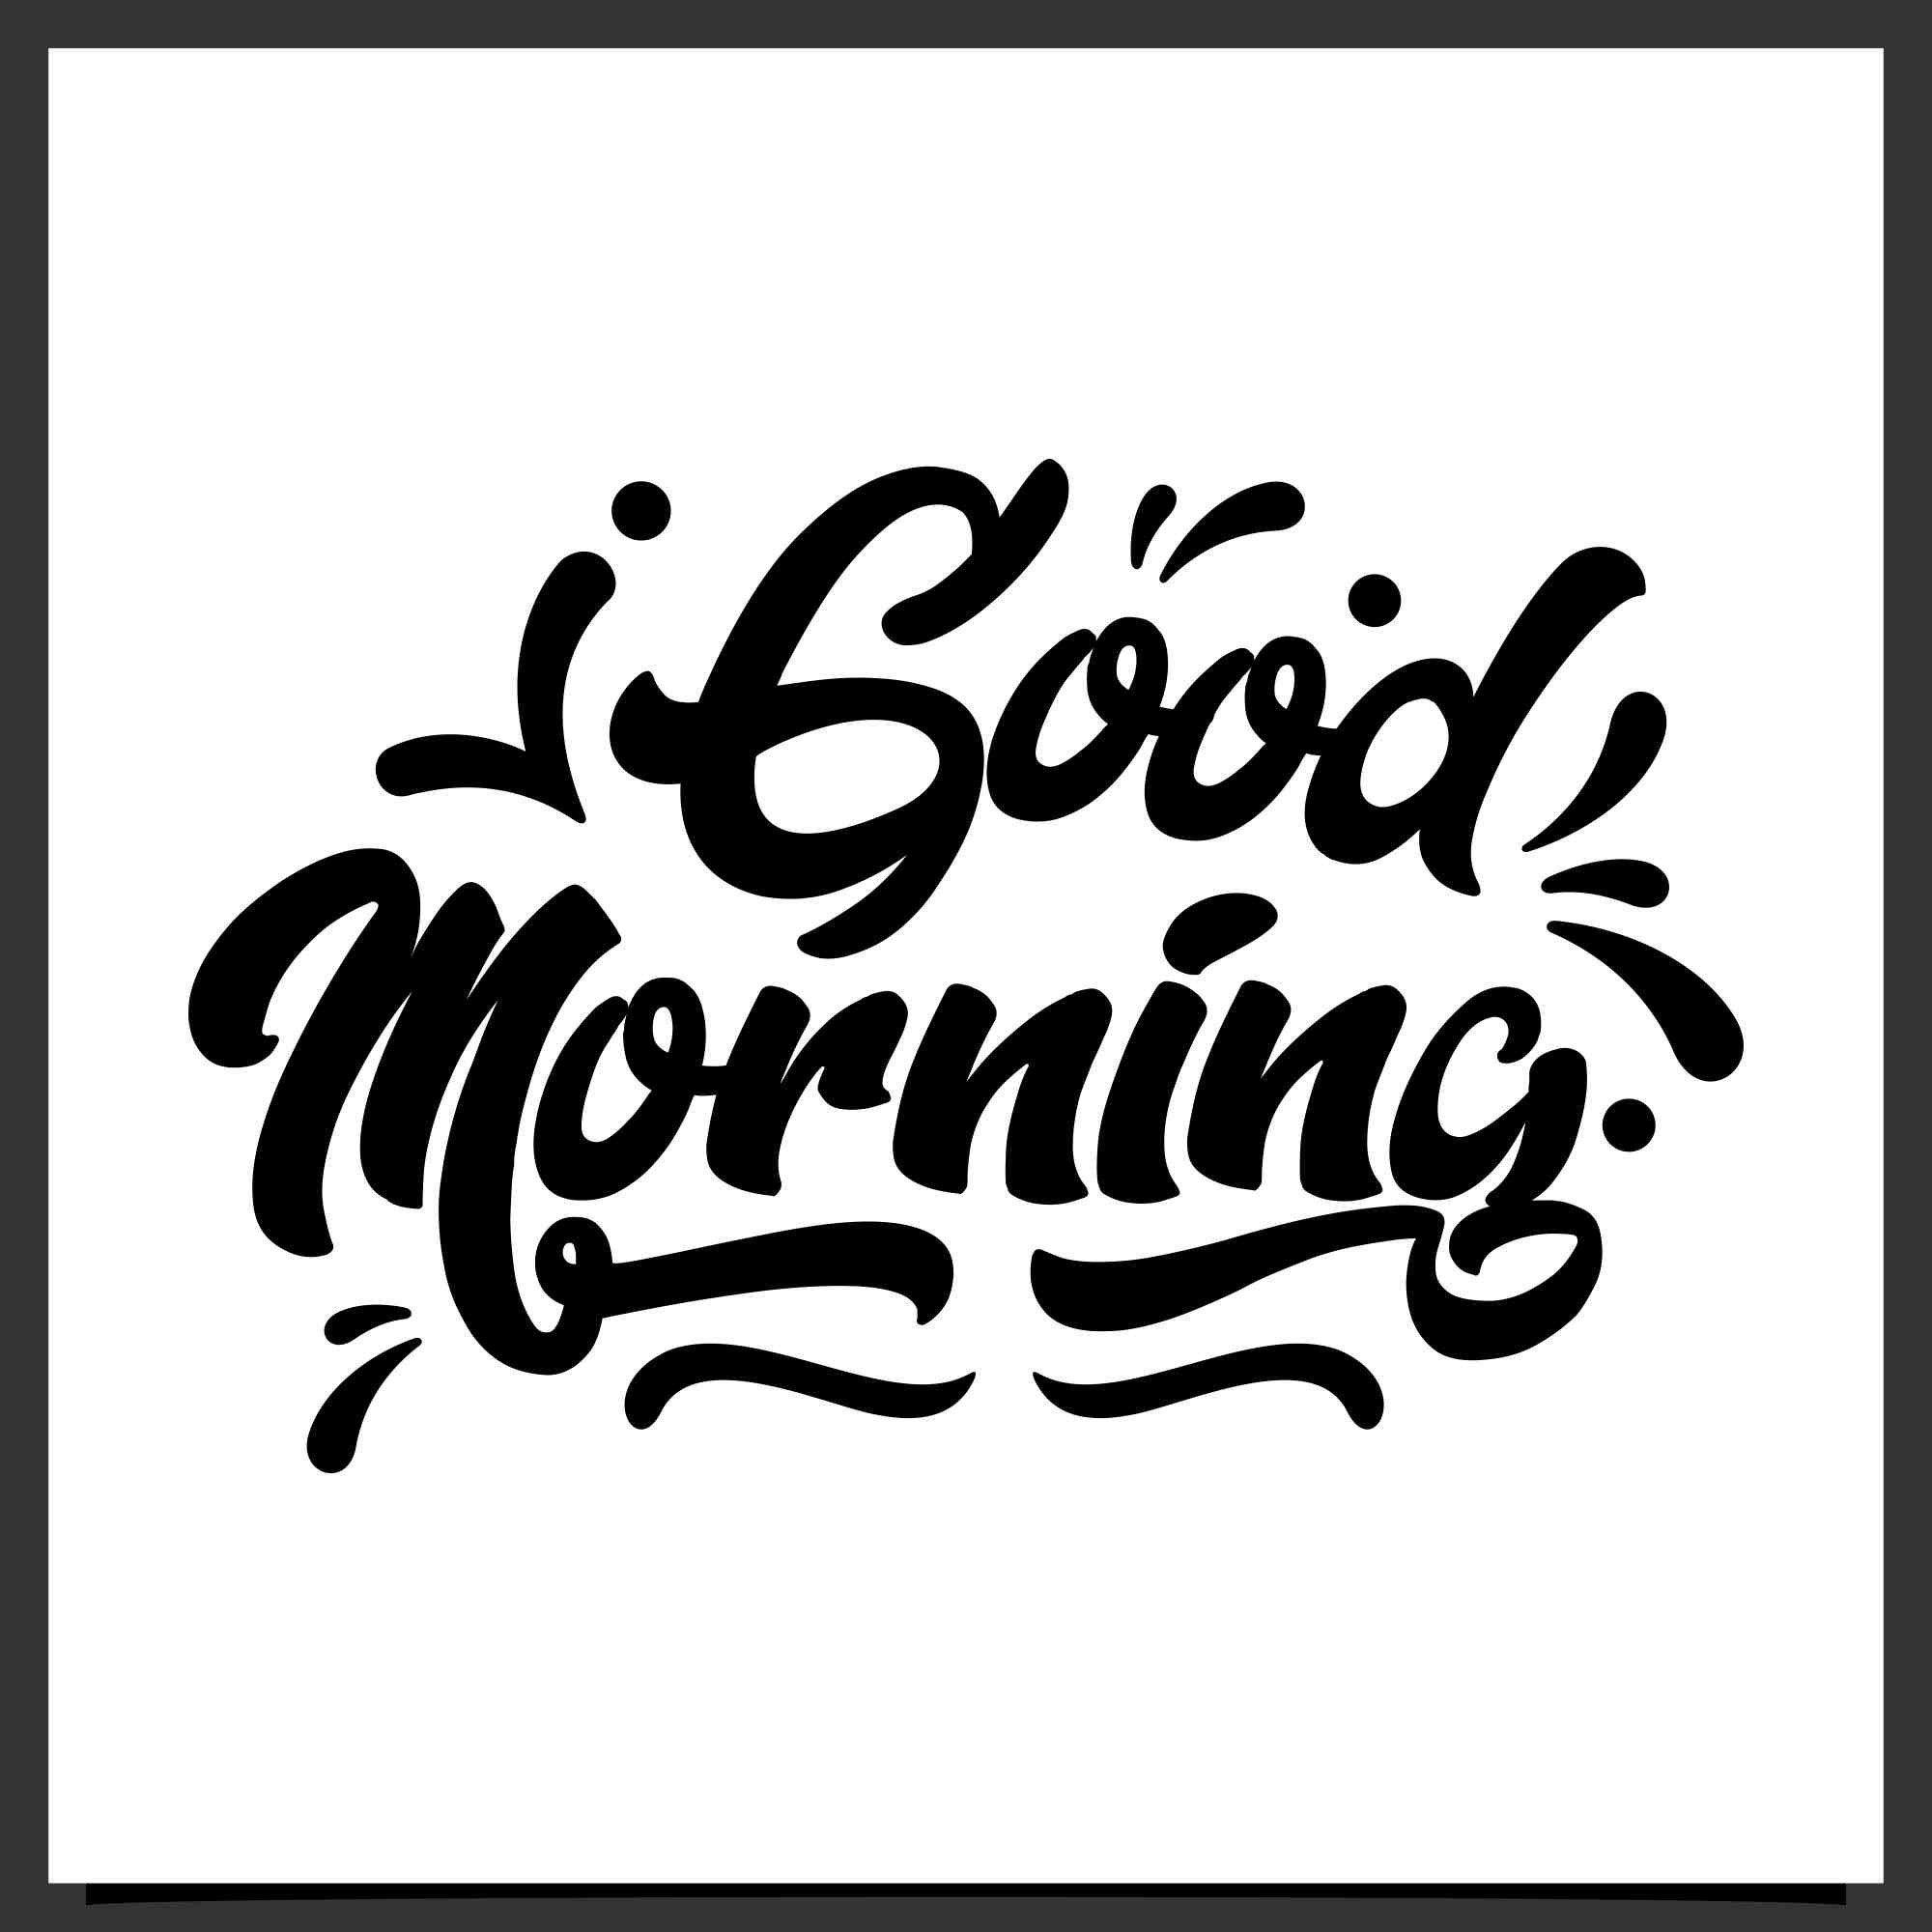 Set Good morning lettering design collection - $6 preview image.